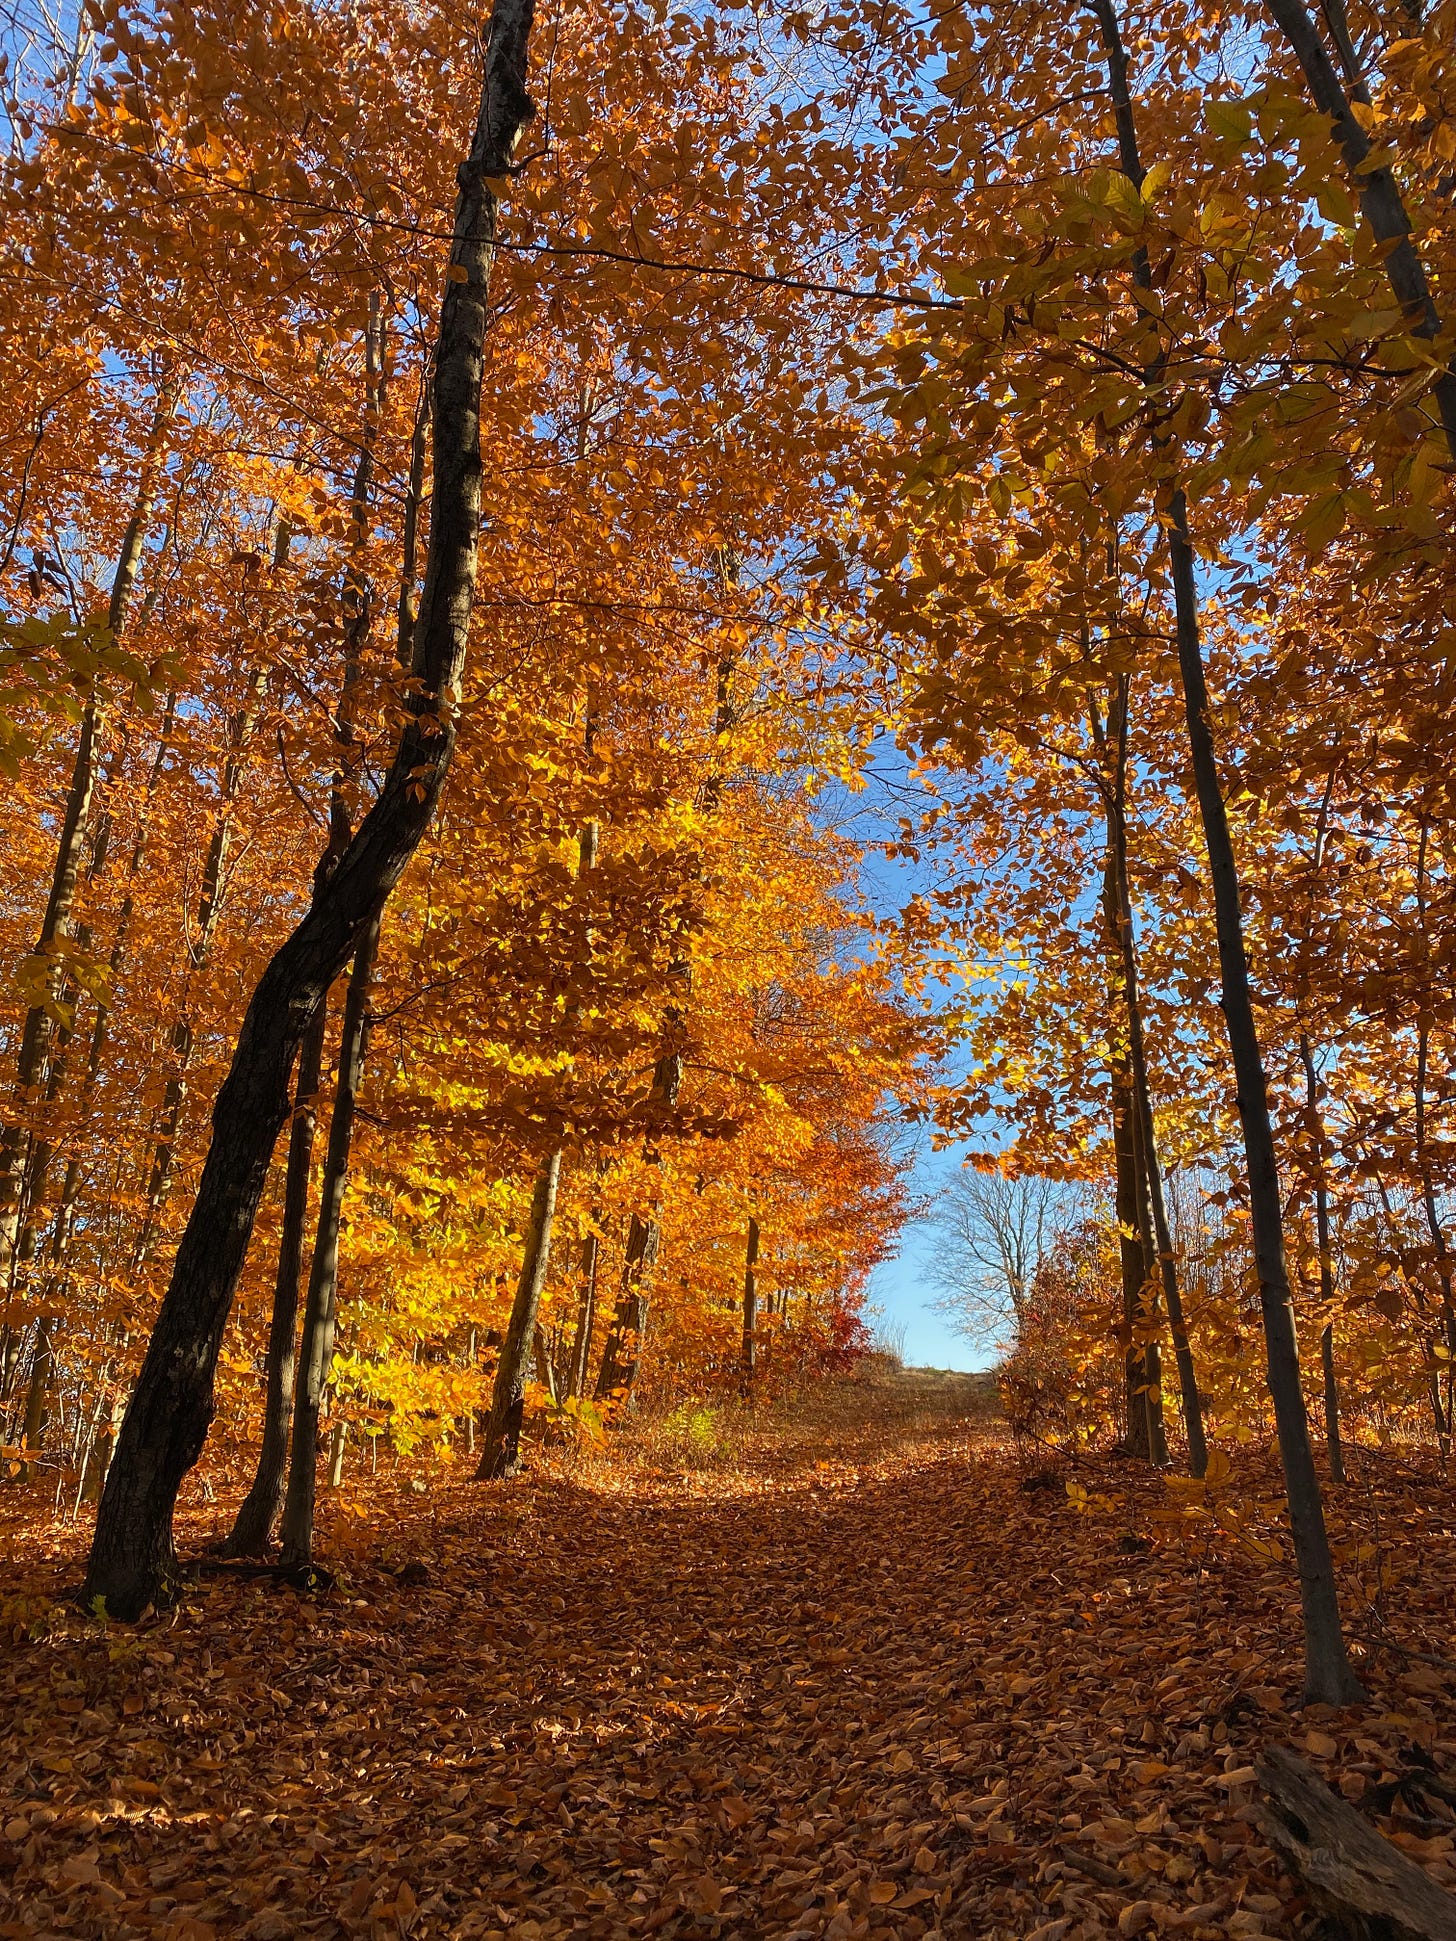 A wooded path covered in fallen brown leaves, and lined on either side by brilliant orange, golden, and yellow beech trees glowing in the late afternoon sunshine.